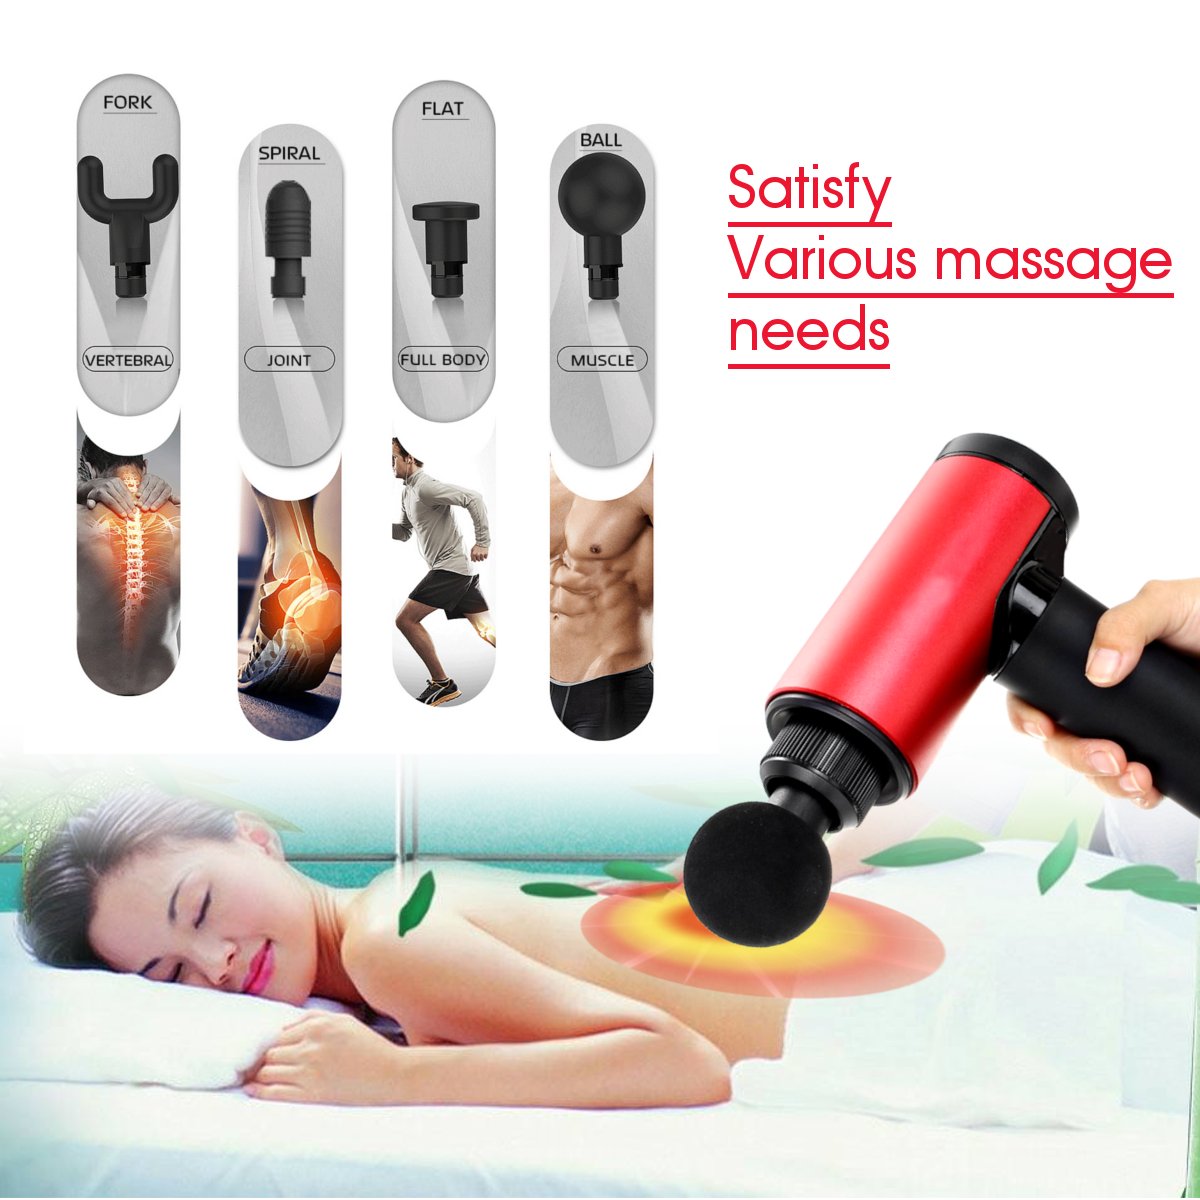 Vibrating-Massager-Therapy-G-un-Electric-Vibration-Muscle-Massage-Therapy-Device-1503348-4